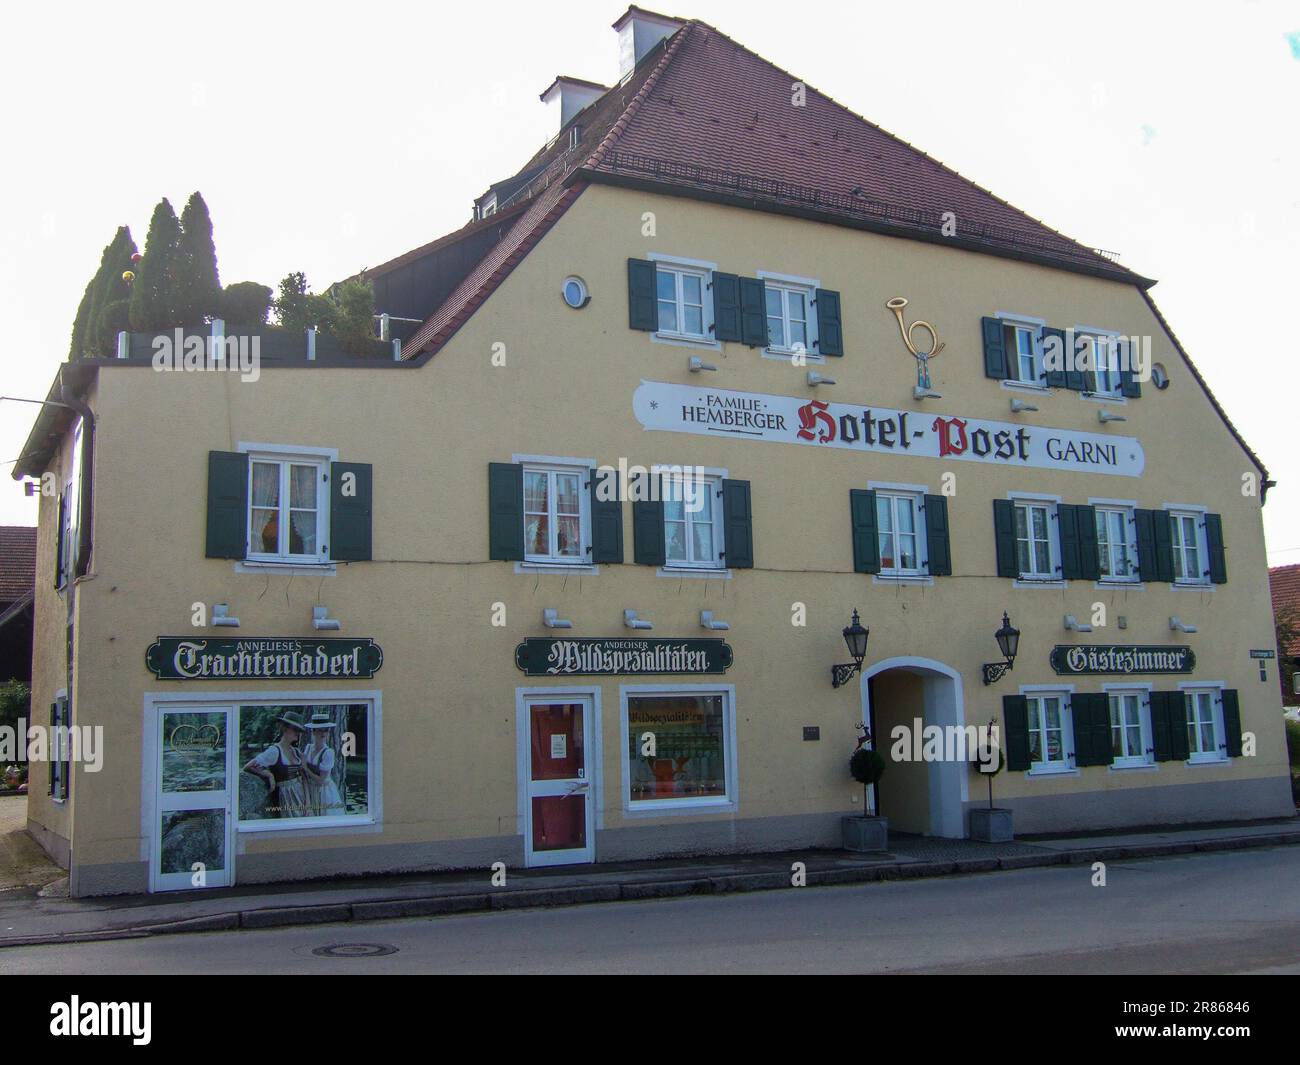 Erling (Andechs), Bavaria, Germany: 19 October 2010: The building of the Hotel zur Post Garni with small game store and traditional costume store Stock Photo